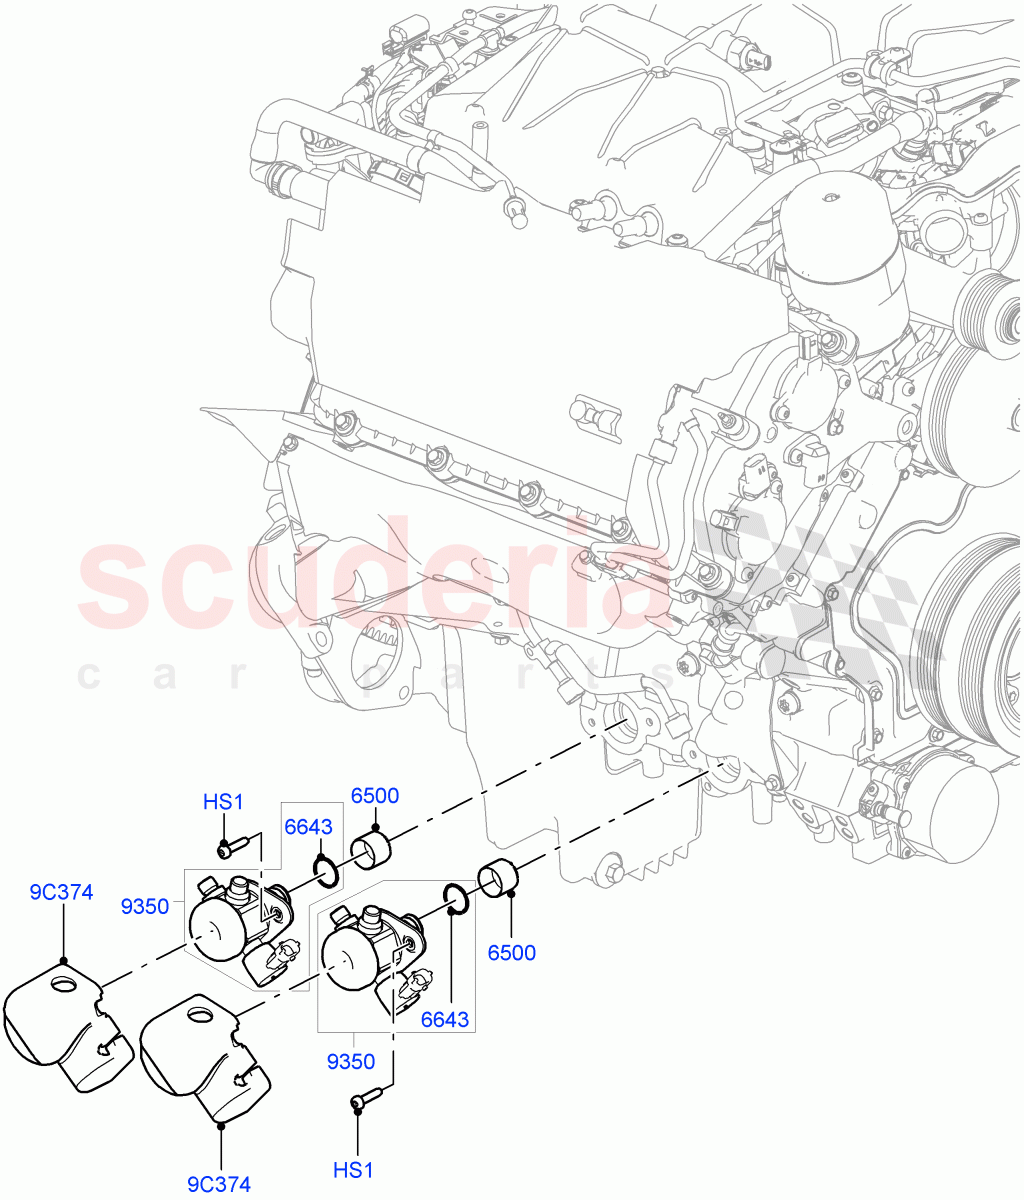 Fuel Injection Pump-Engine Mounted(Solihull Plant Build)(3.0L DOHC GDI SC V6 PETROL)((V)FROMEA000001) of Land Rover Land Rover Discovery 4 (2010-2016) [3.0 DOHC GDI SC V6 Petrol]